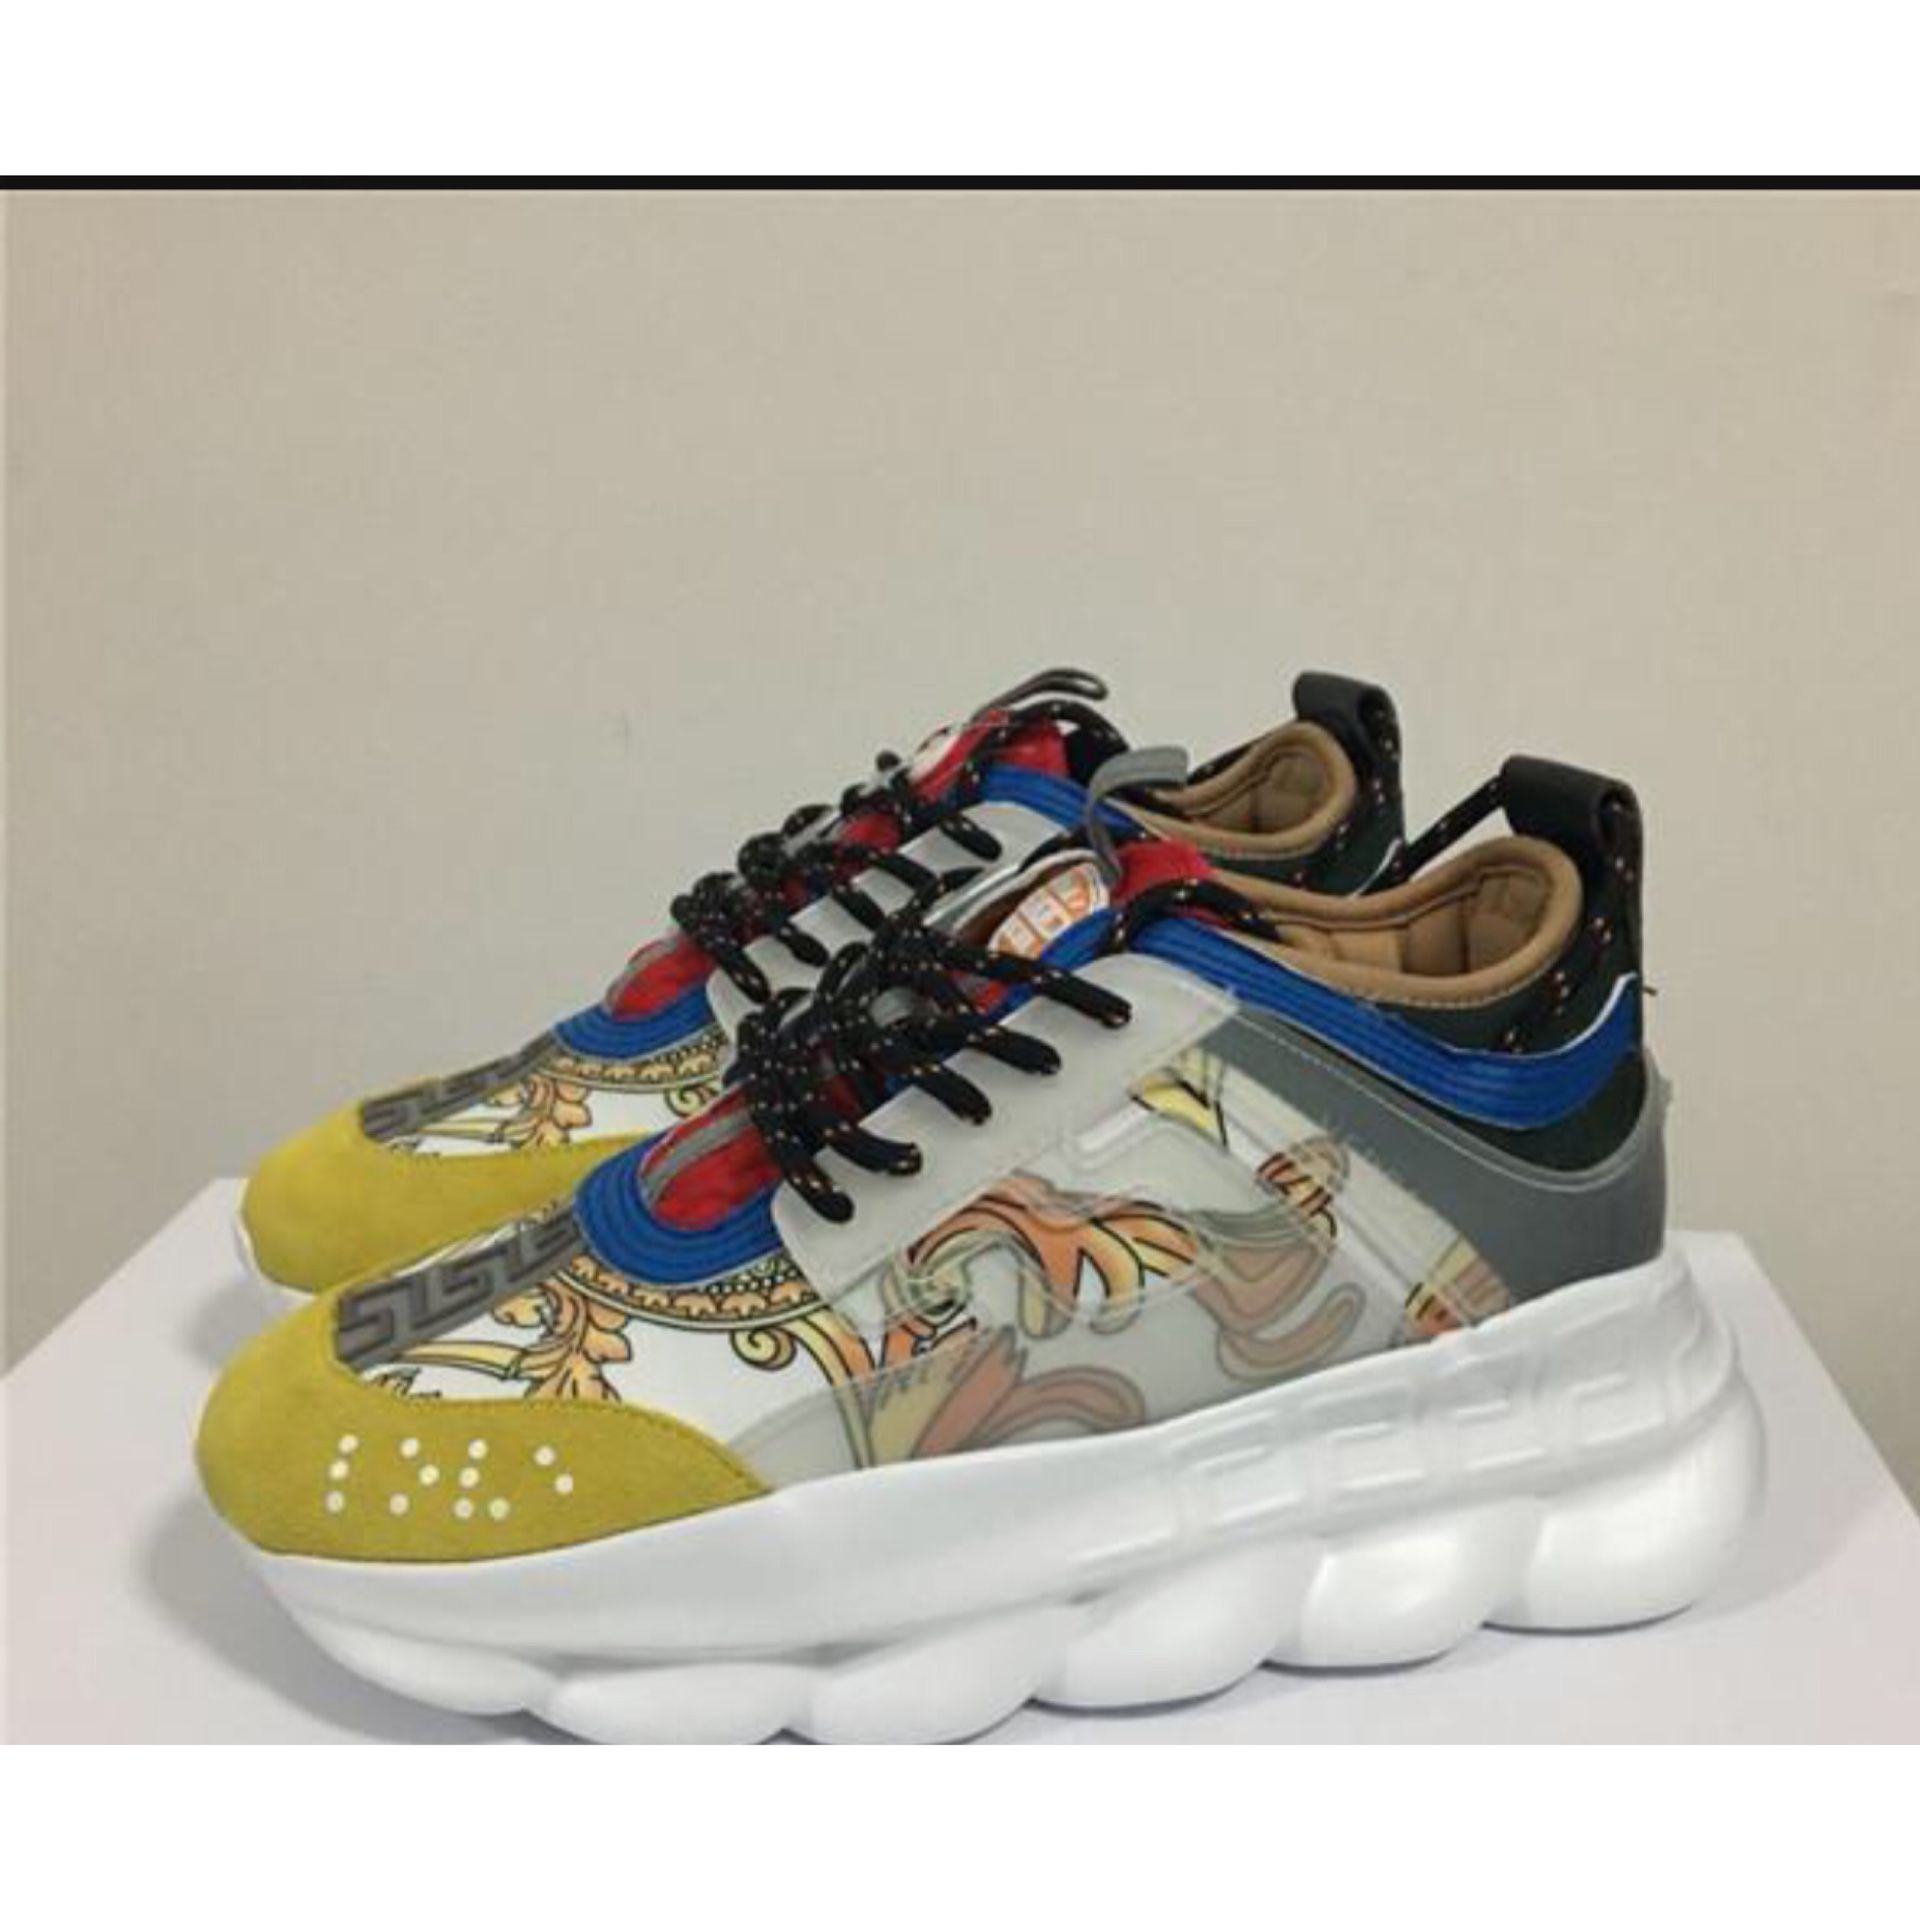 Versace chain reaction for Sale in Houston, TX - OfferUp